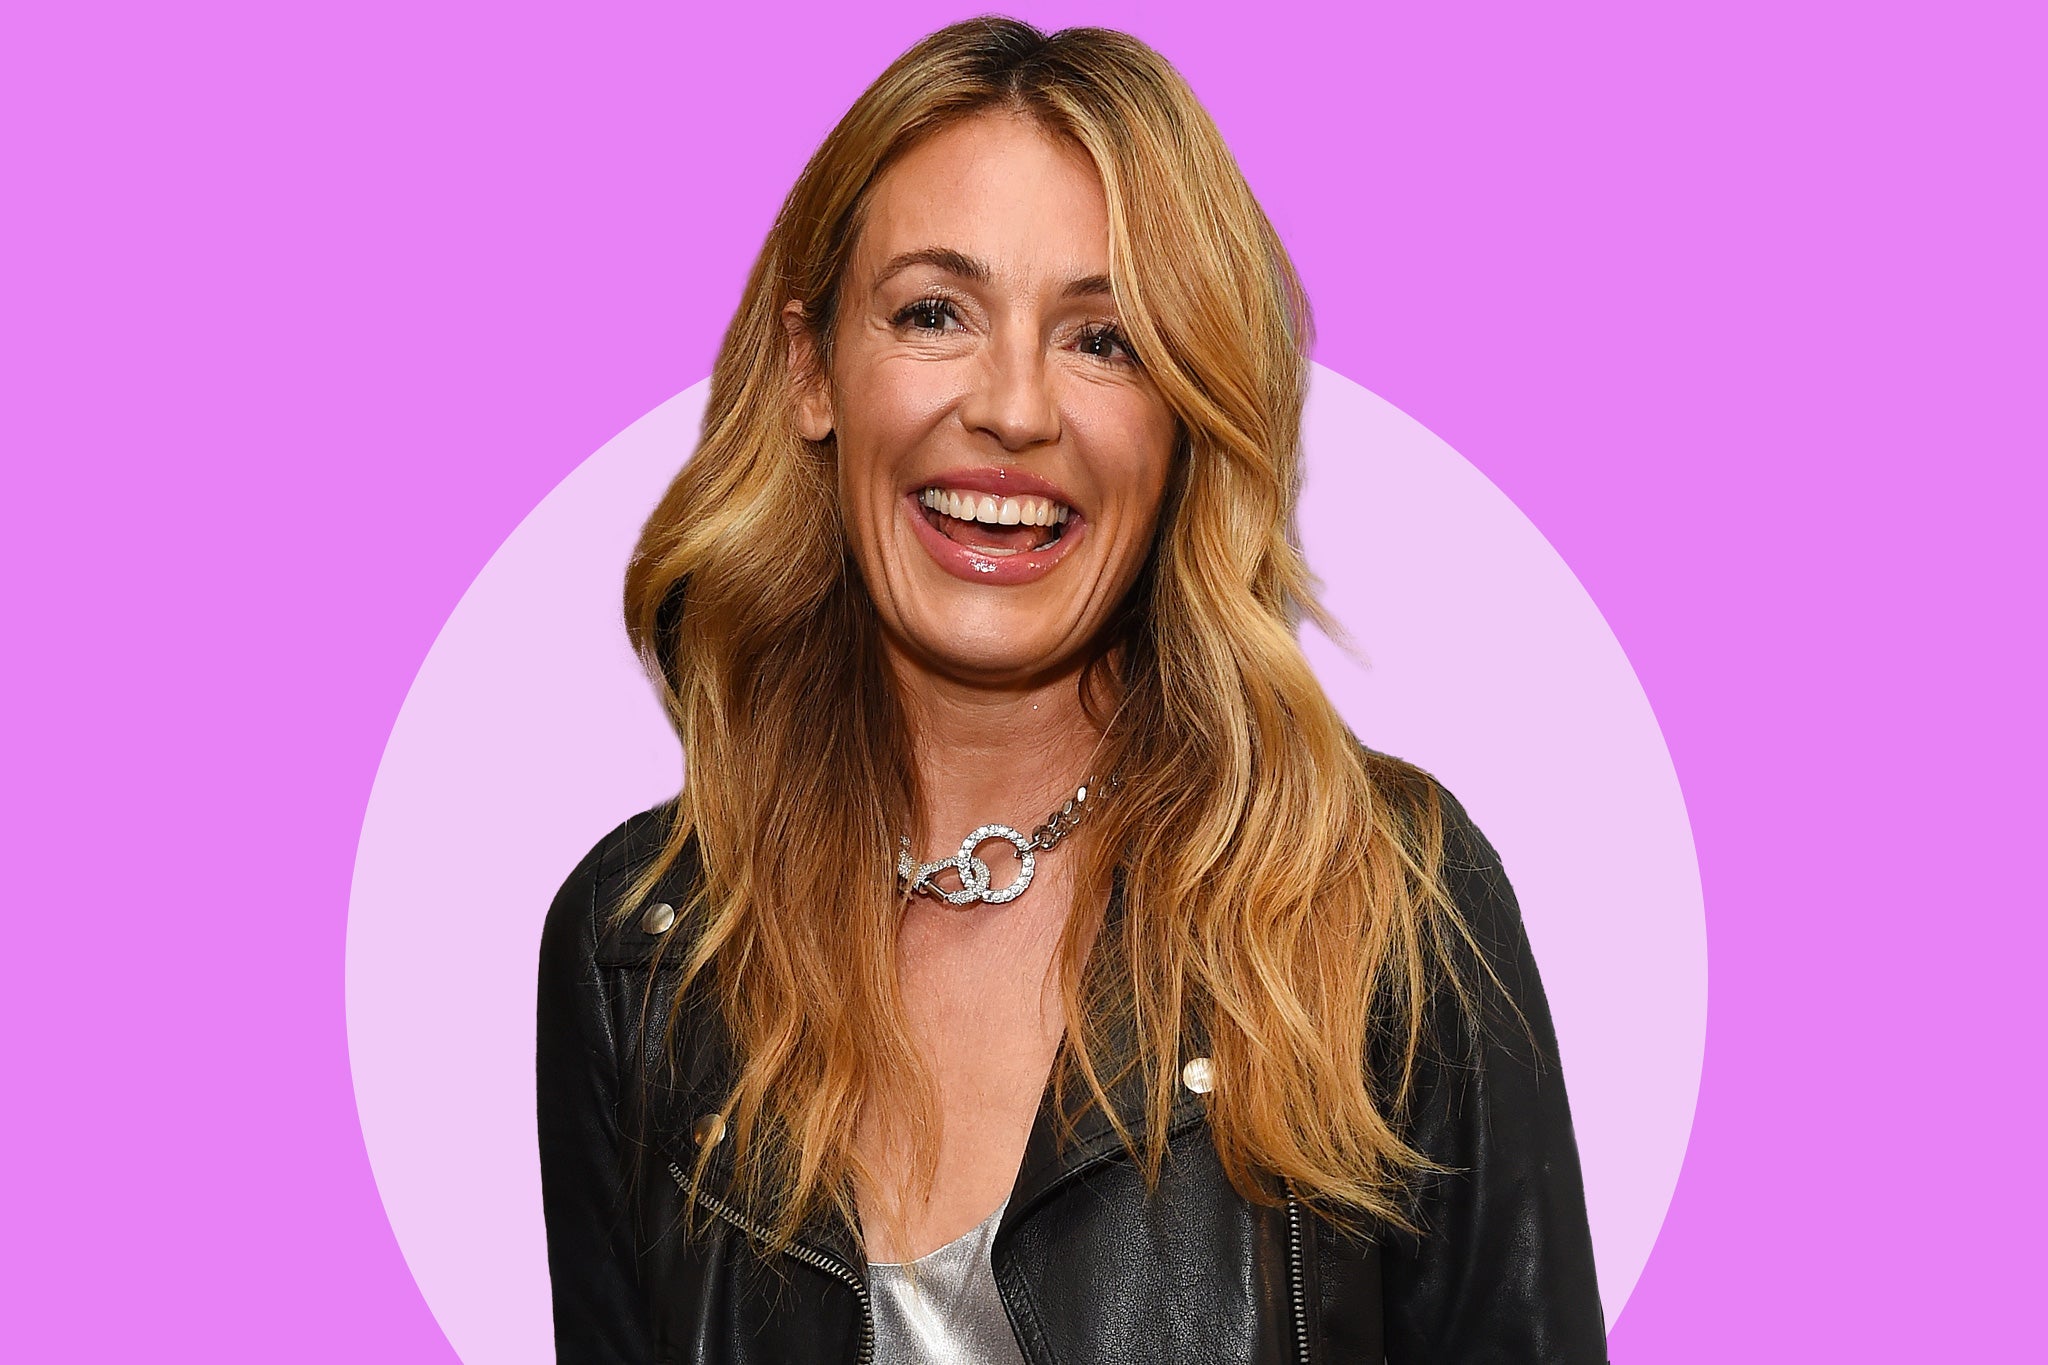 Cat Deeley for This Morning? This very professional presenter